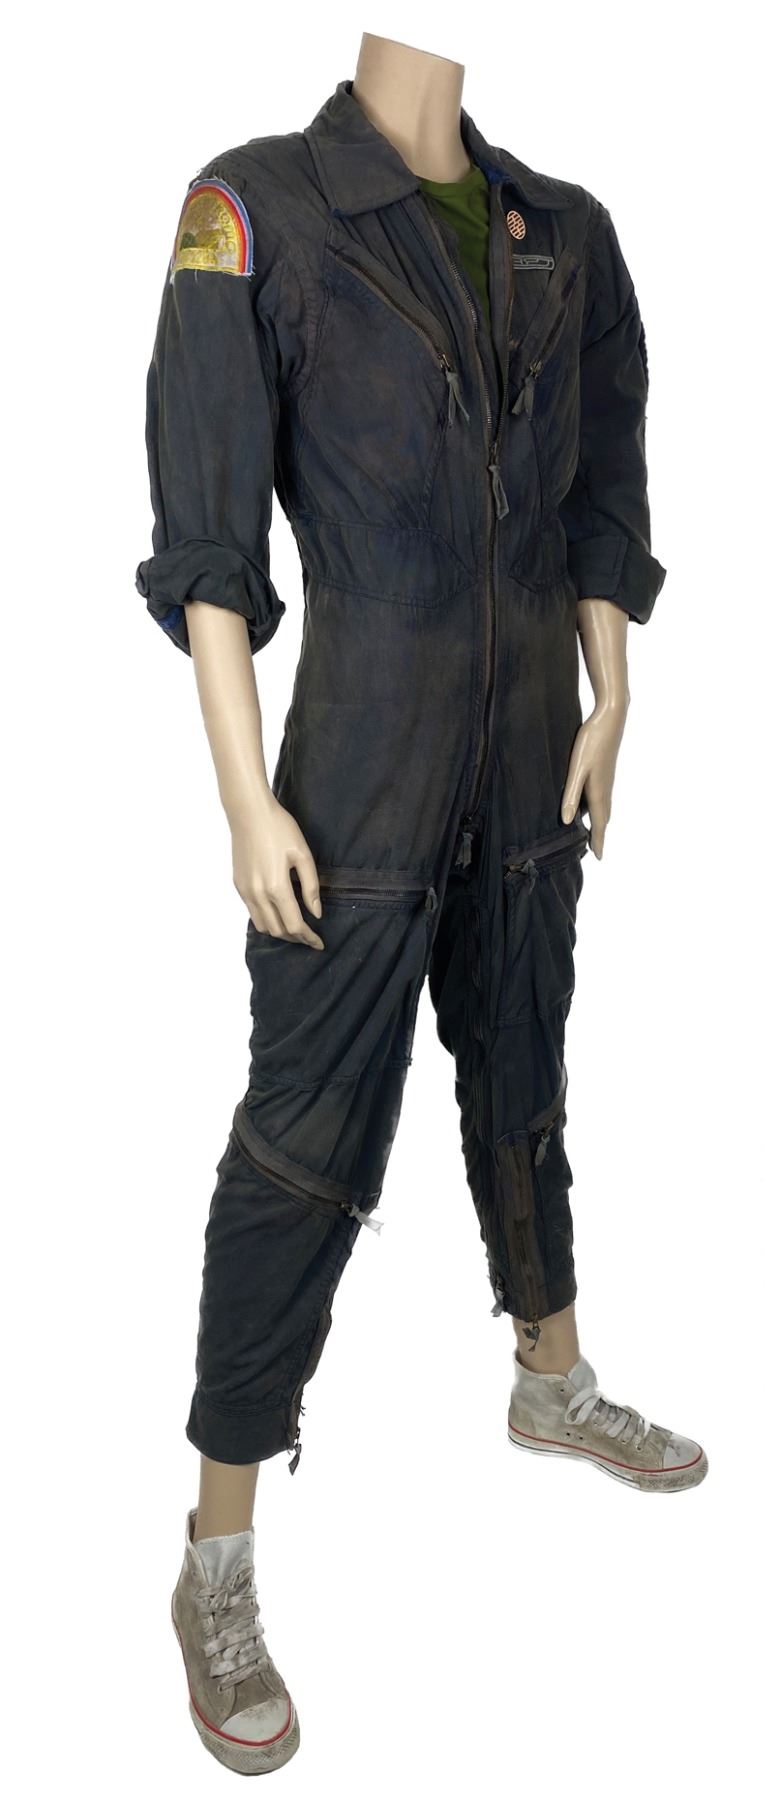 Ripley's Screen-Used A L I E N NOSTROMO Jumpsuit, on Auction, Starting:  $85,000 | RPF Costume and Prop Maker Community